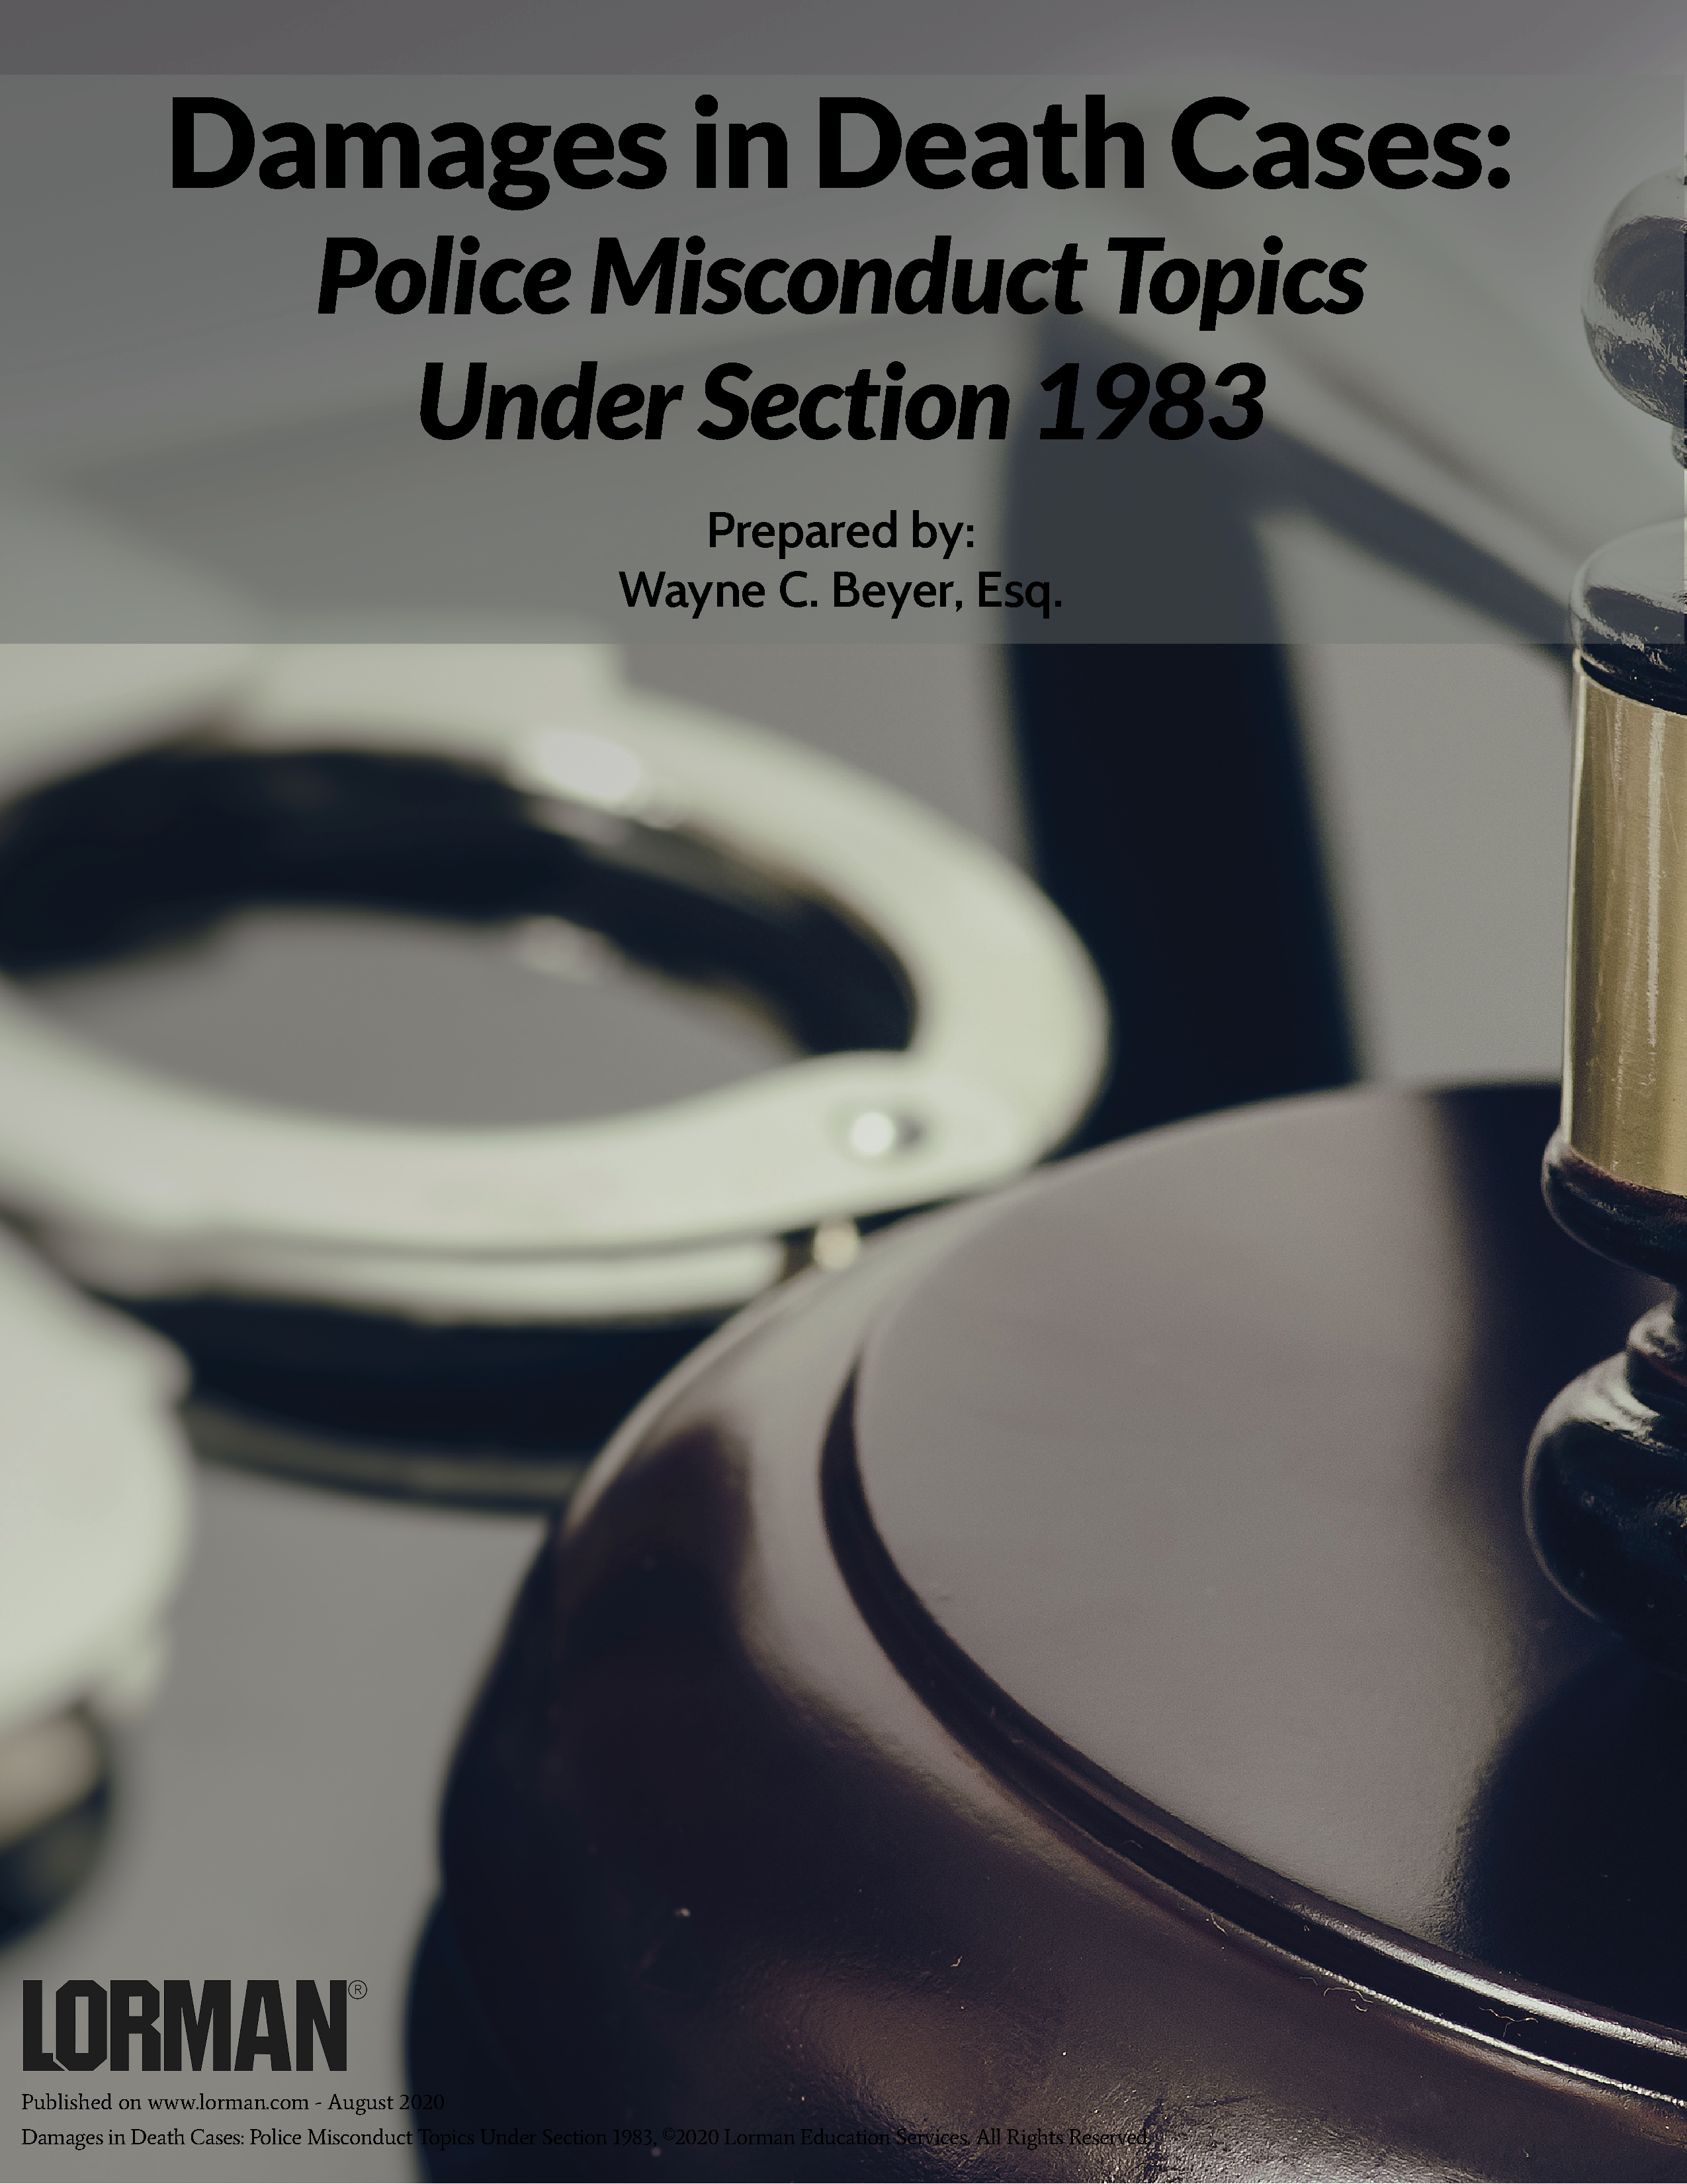 Damages in Death Cases: Police Misconduct Topics Under Section 1983